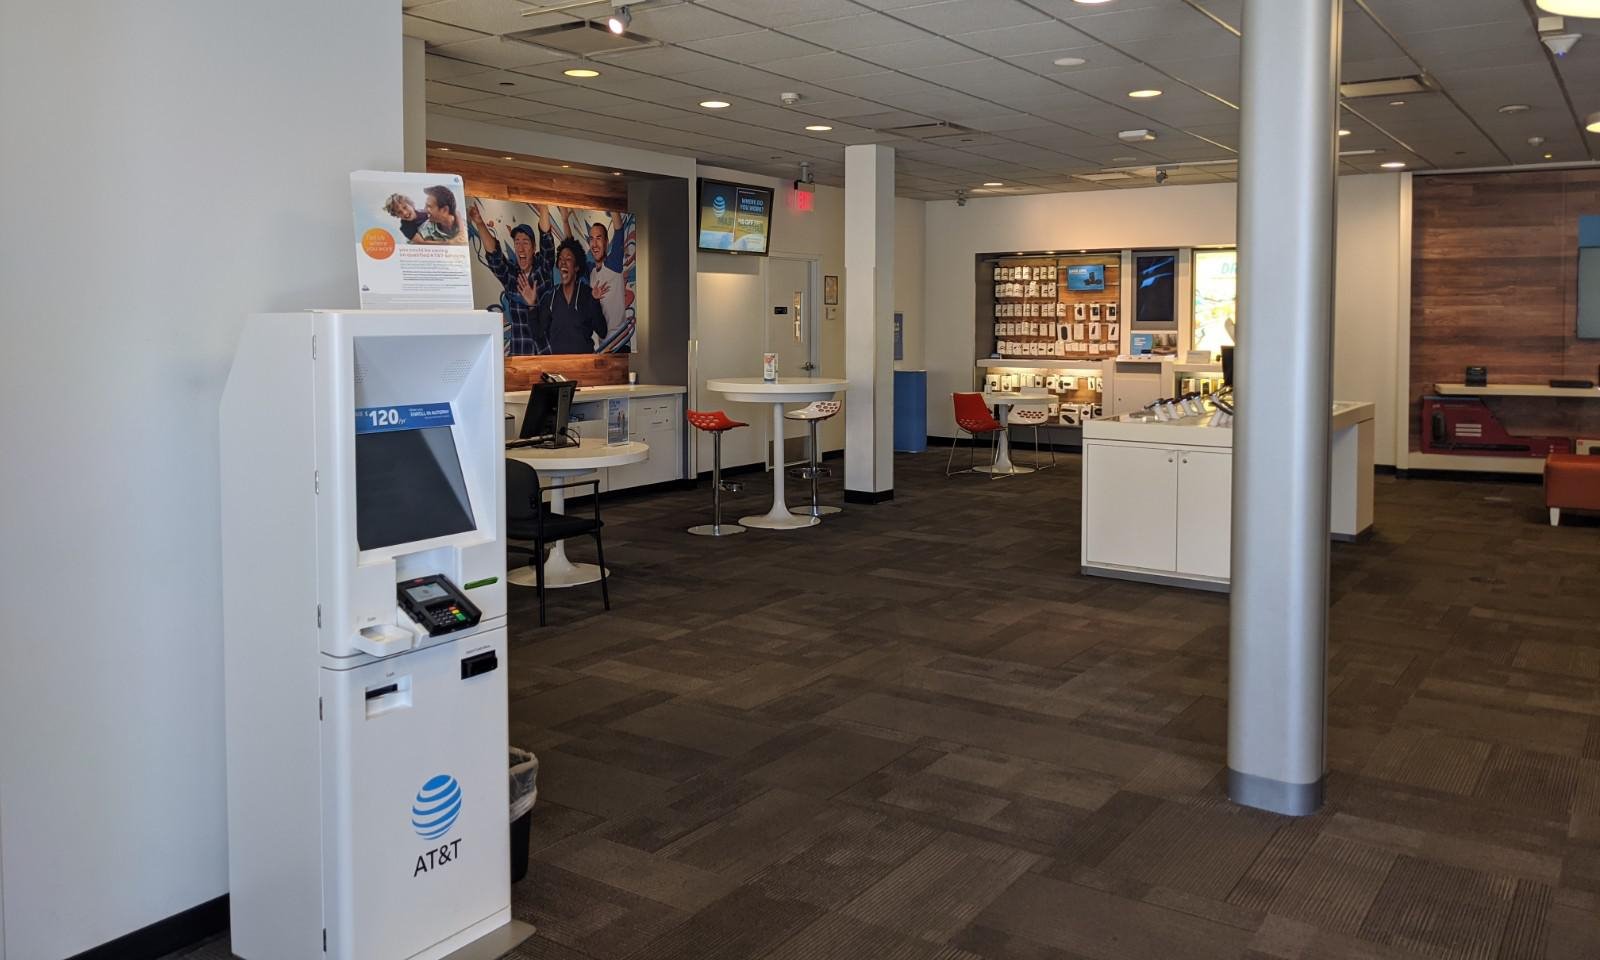 Inside store - Payment station